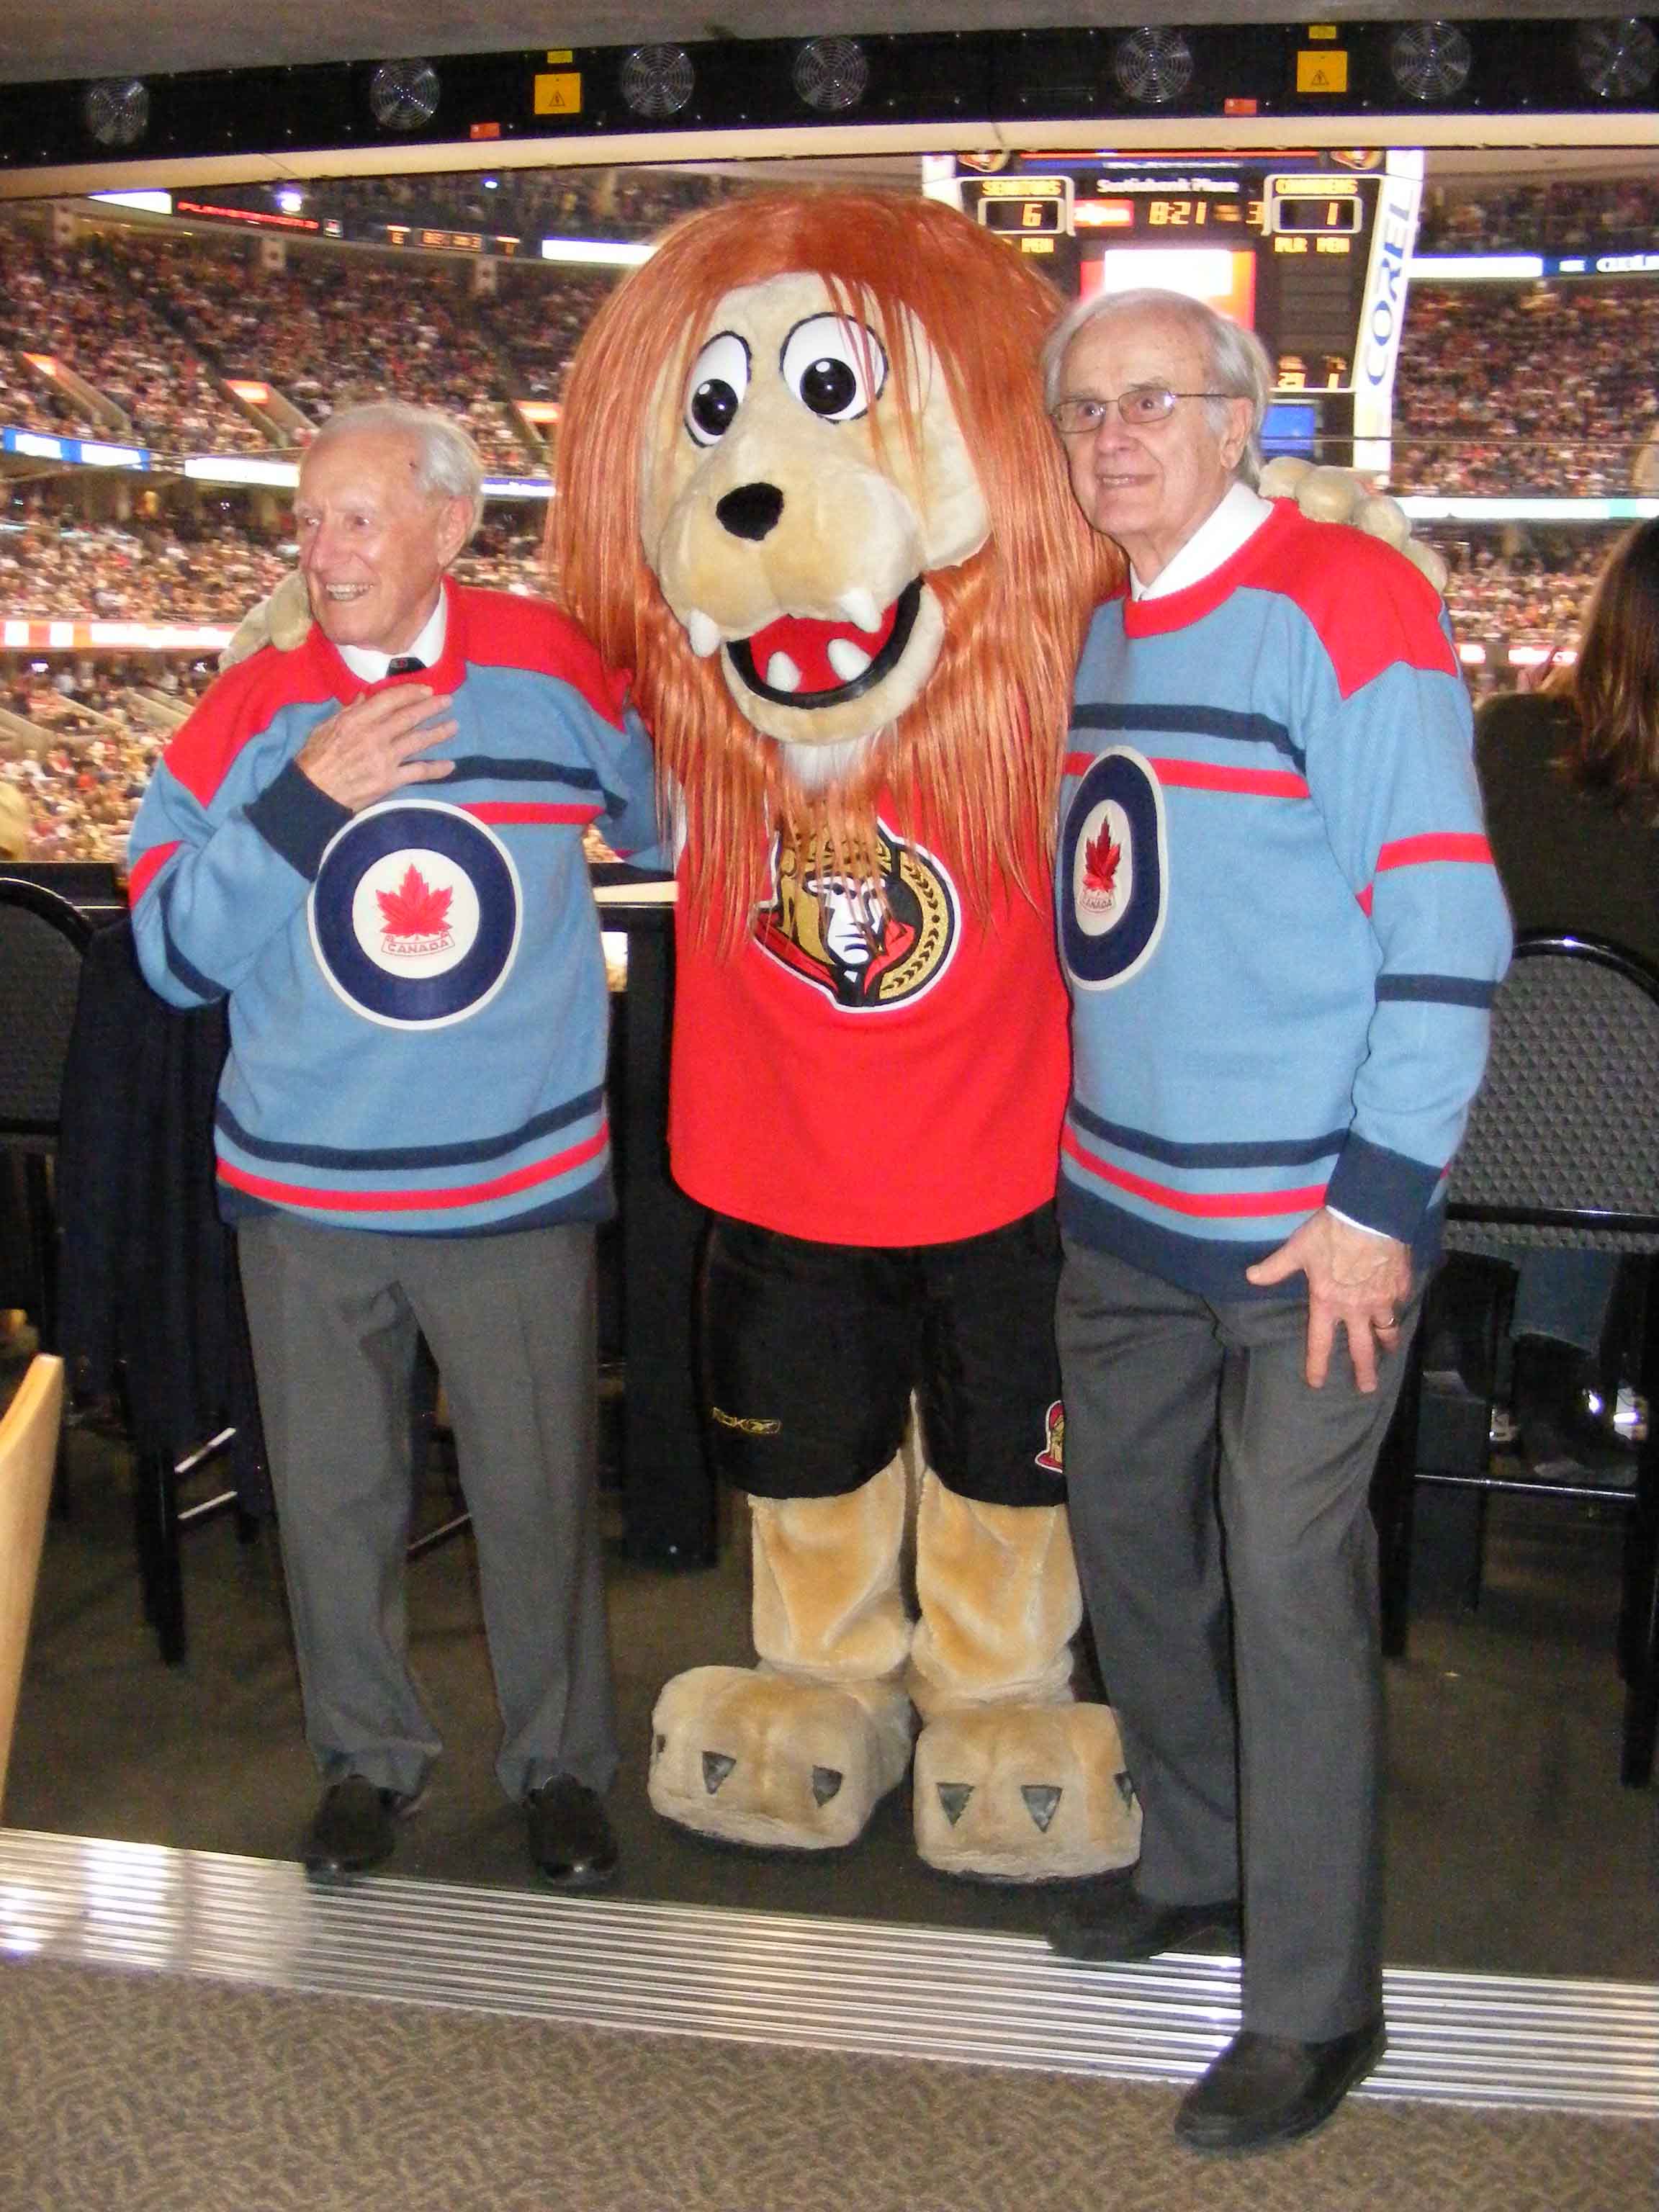 Former RCAF Flyers team mates Ab Renaud (left) and André Laperrière, sporting their replica 1948 Olympics jerseys specially produced by the Royal Canadian Air Force Association, are greeted by Spartacat, the mascot of the Ottawa Senators hockey team. Mr. Renaud and Mr. Laperrière dropped the puck at the February 9, 2008, game between the Senators and the Montreal Canadiens in Ottawa. PHOTO: Dean Black, RCAFA